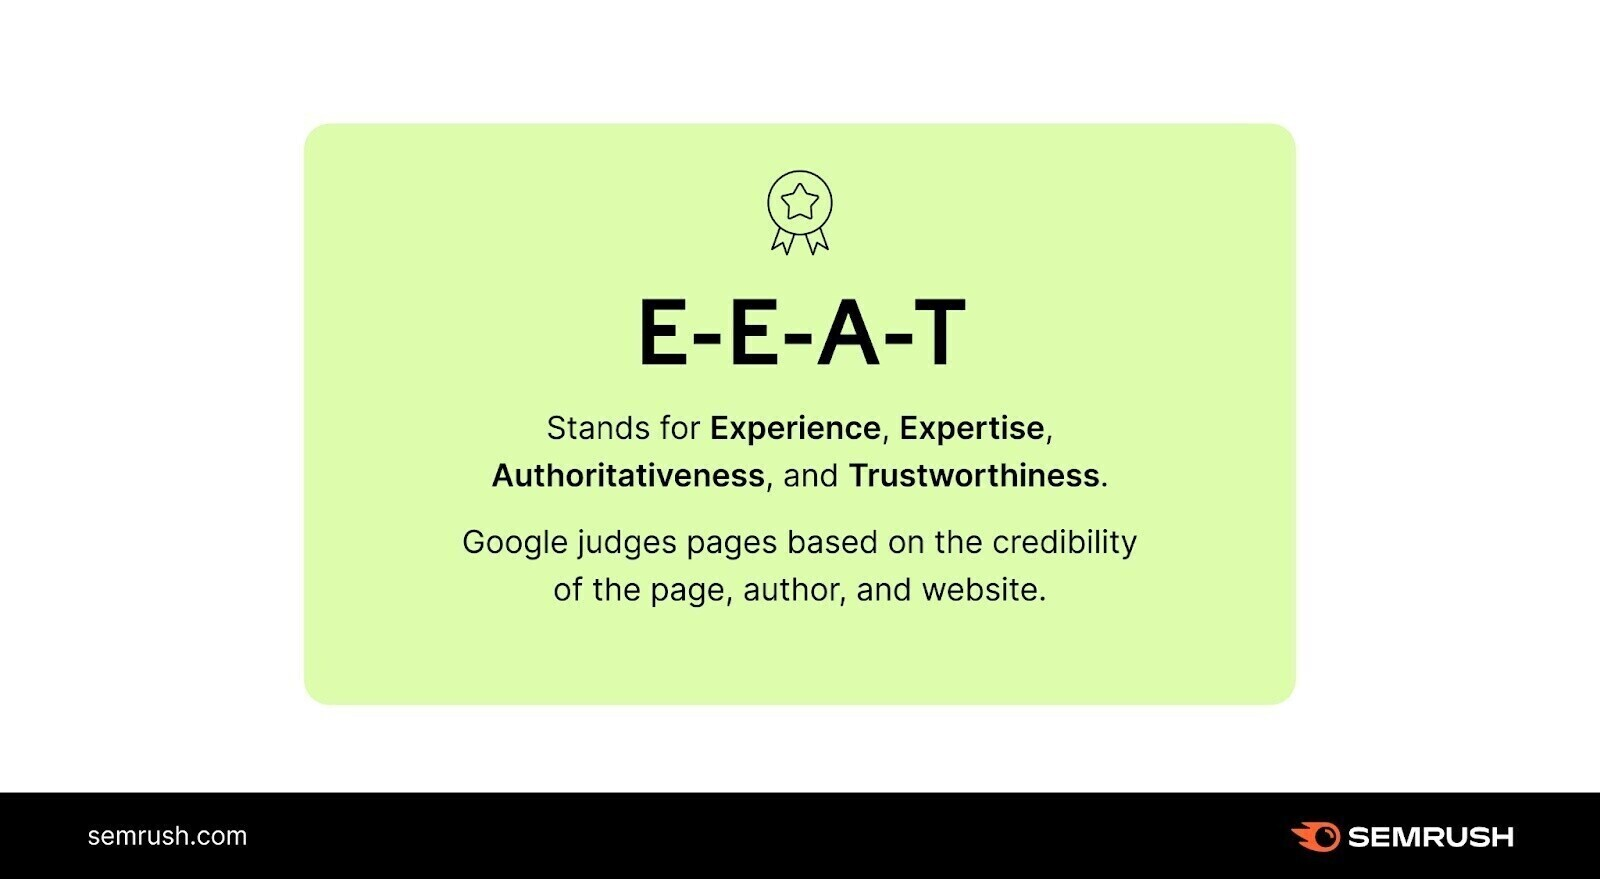 An image explaining what E-E-A-T stands for